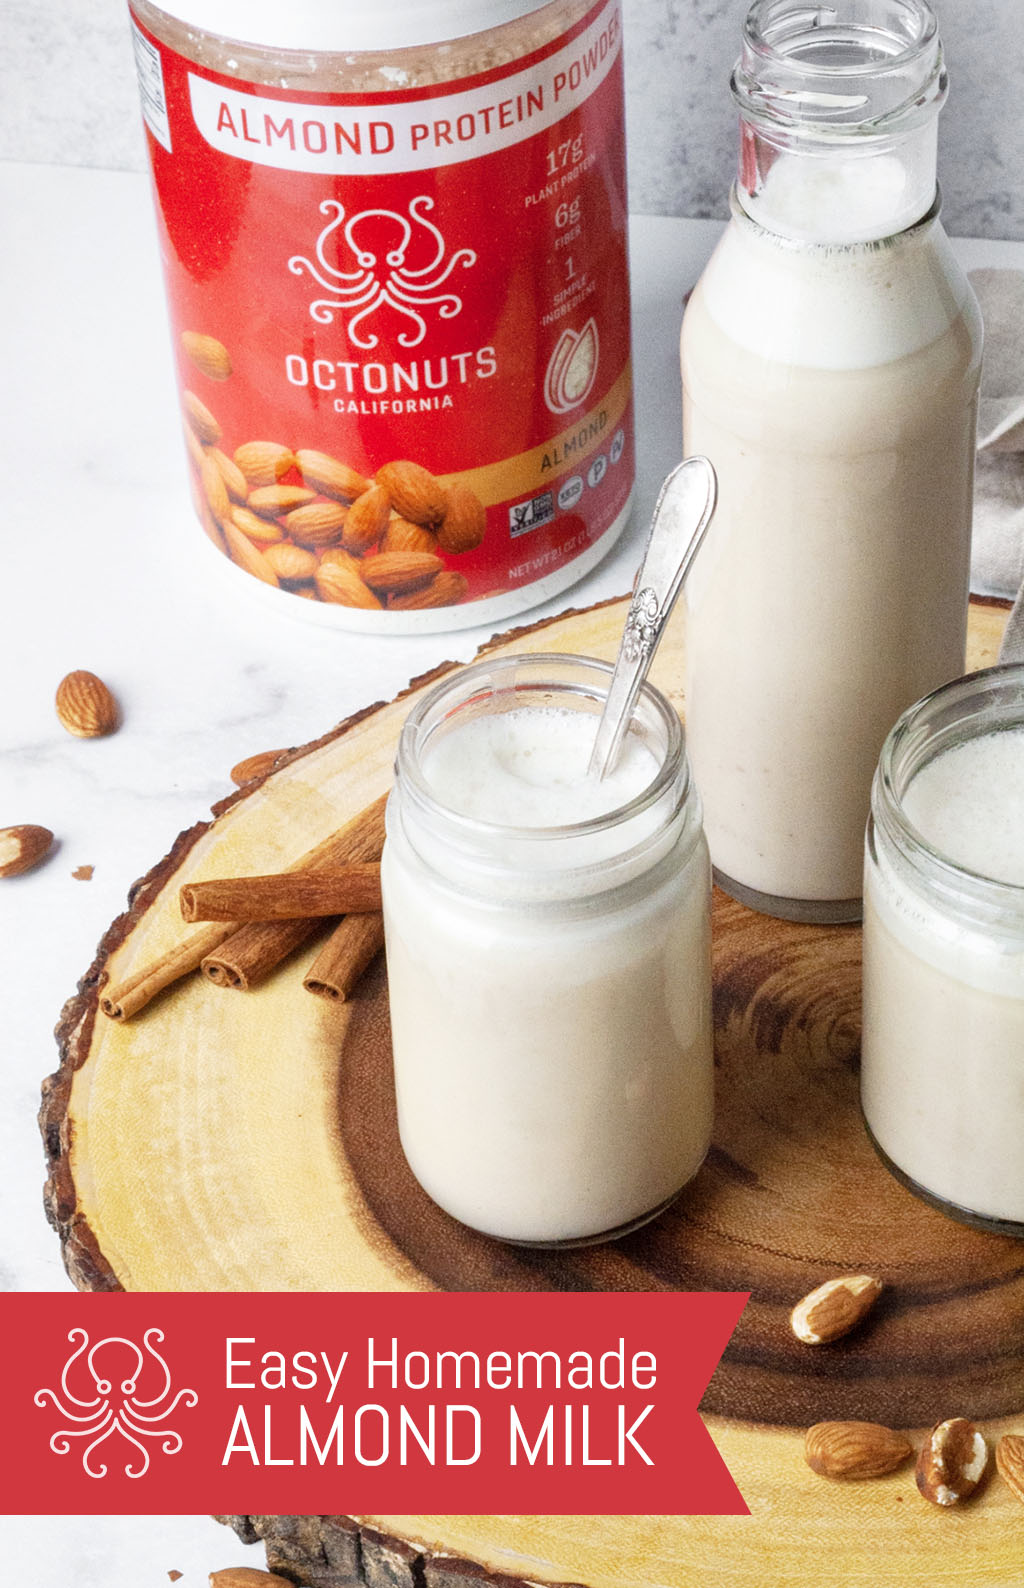 You won't believe how easy it is to make your own Almond Milk with Octonuts Almond Protein Powder